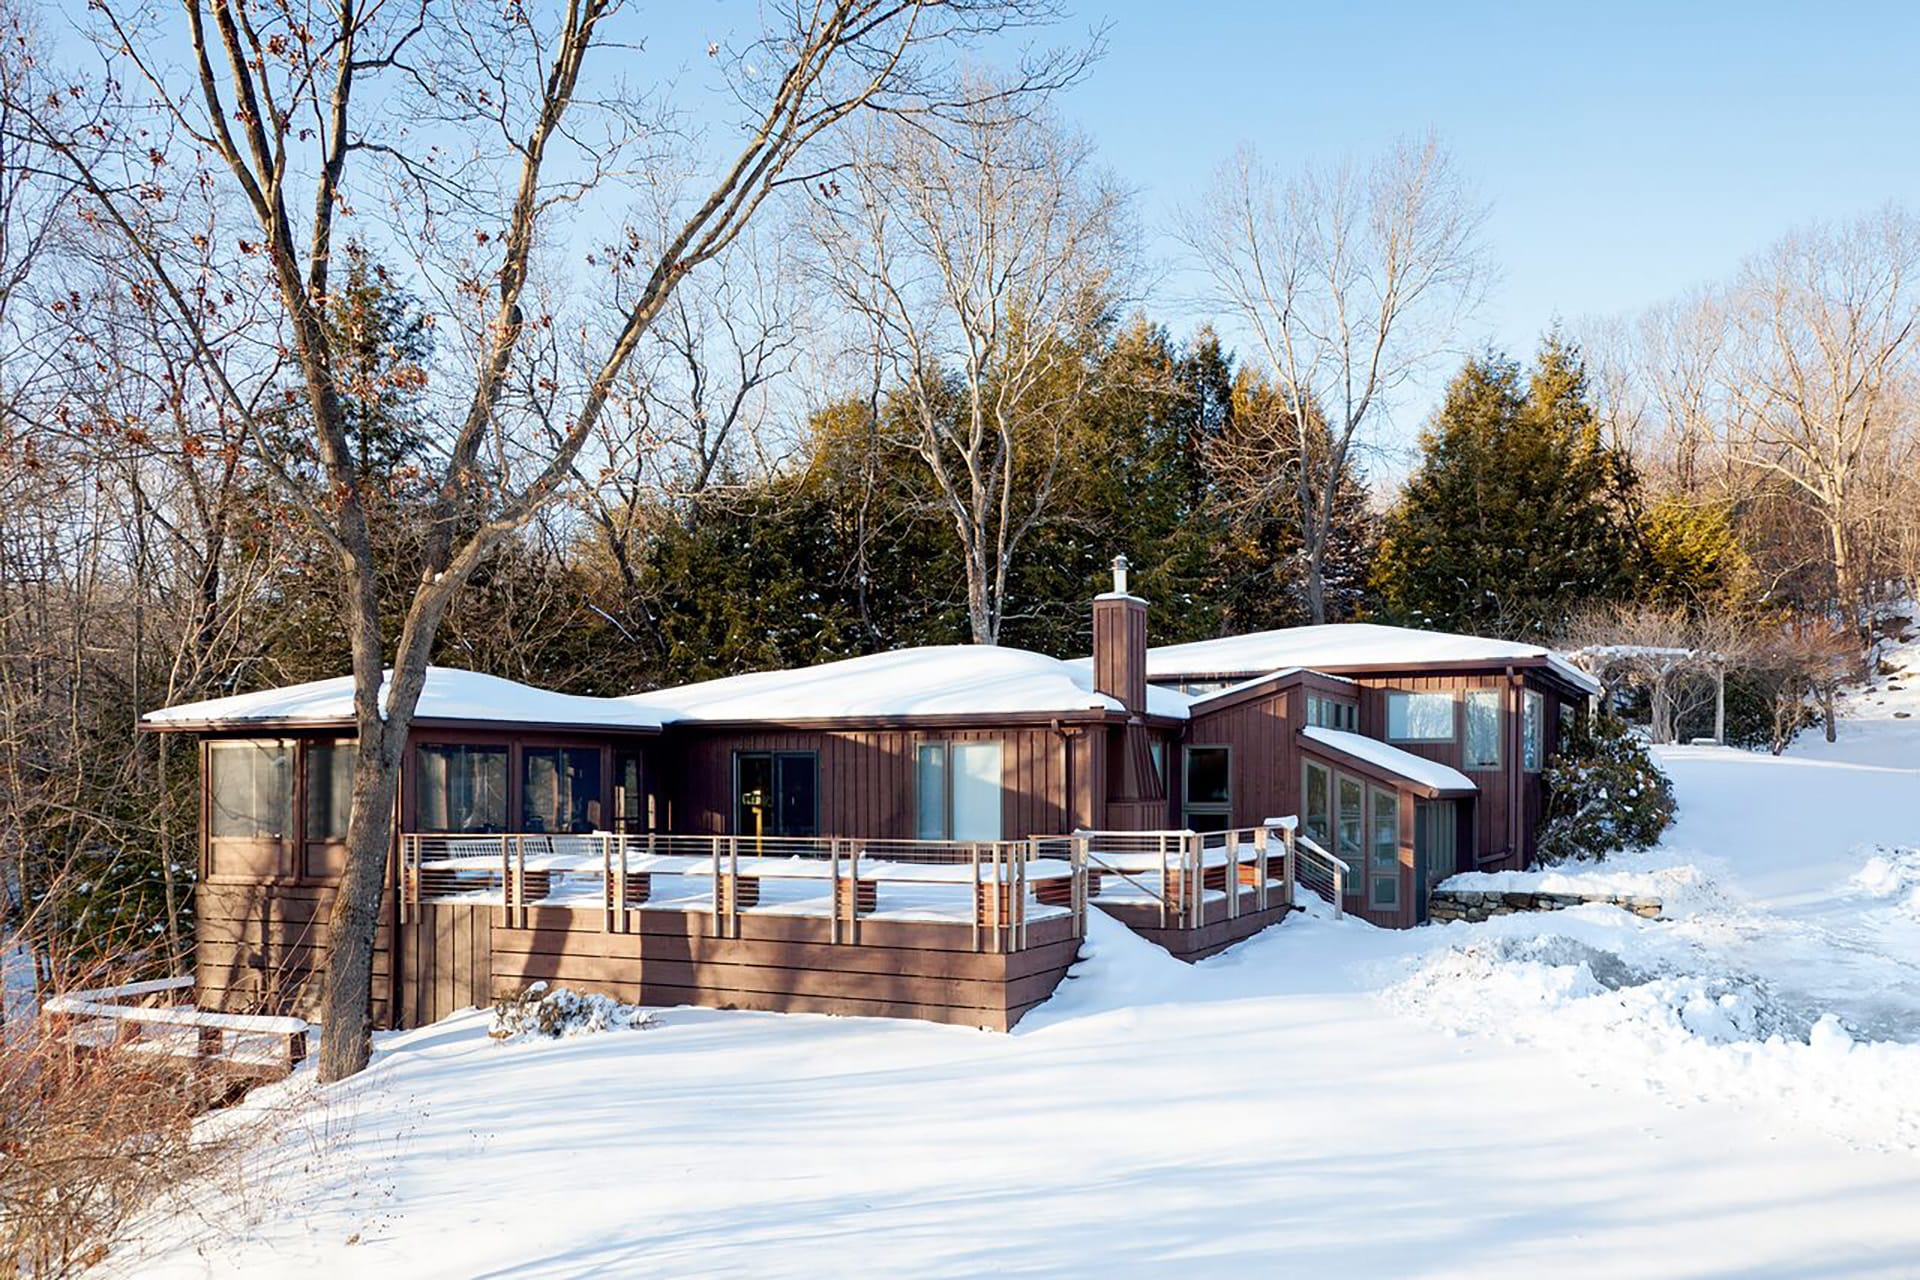 Exterior of a South Kent, Connecticut home in the snow